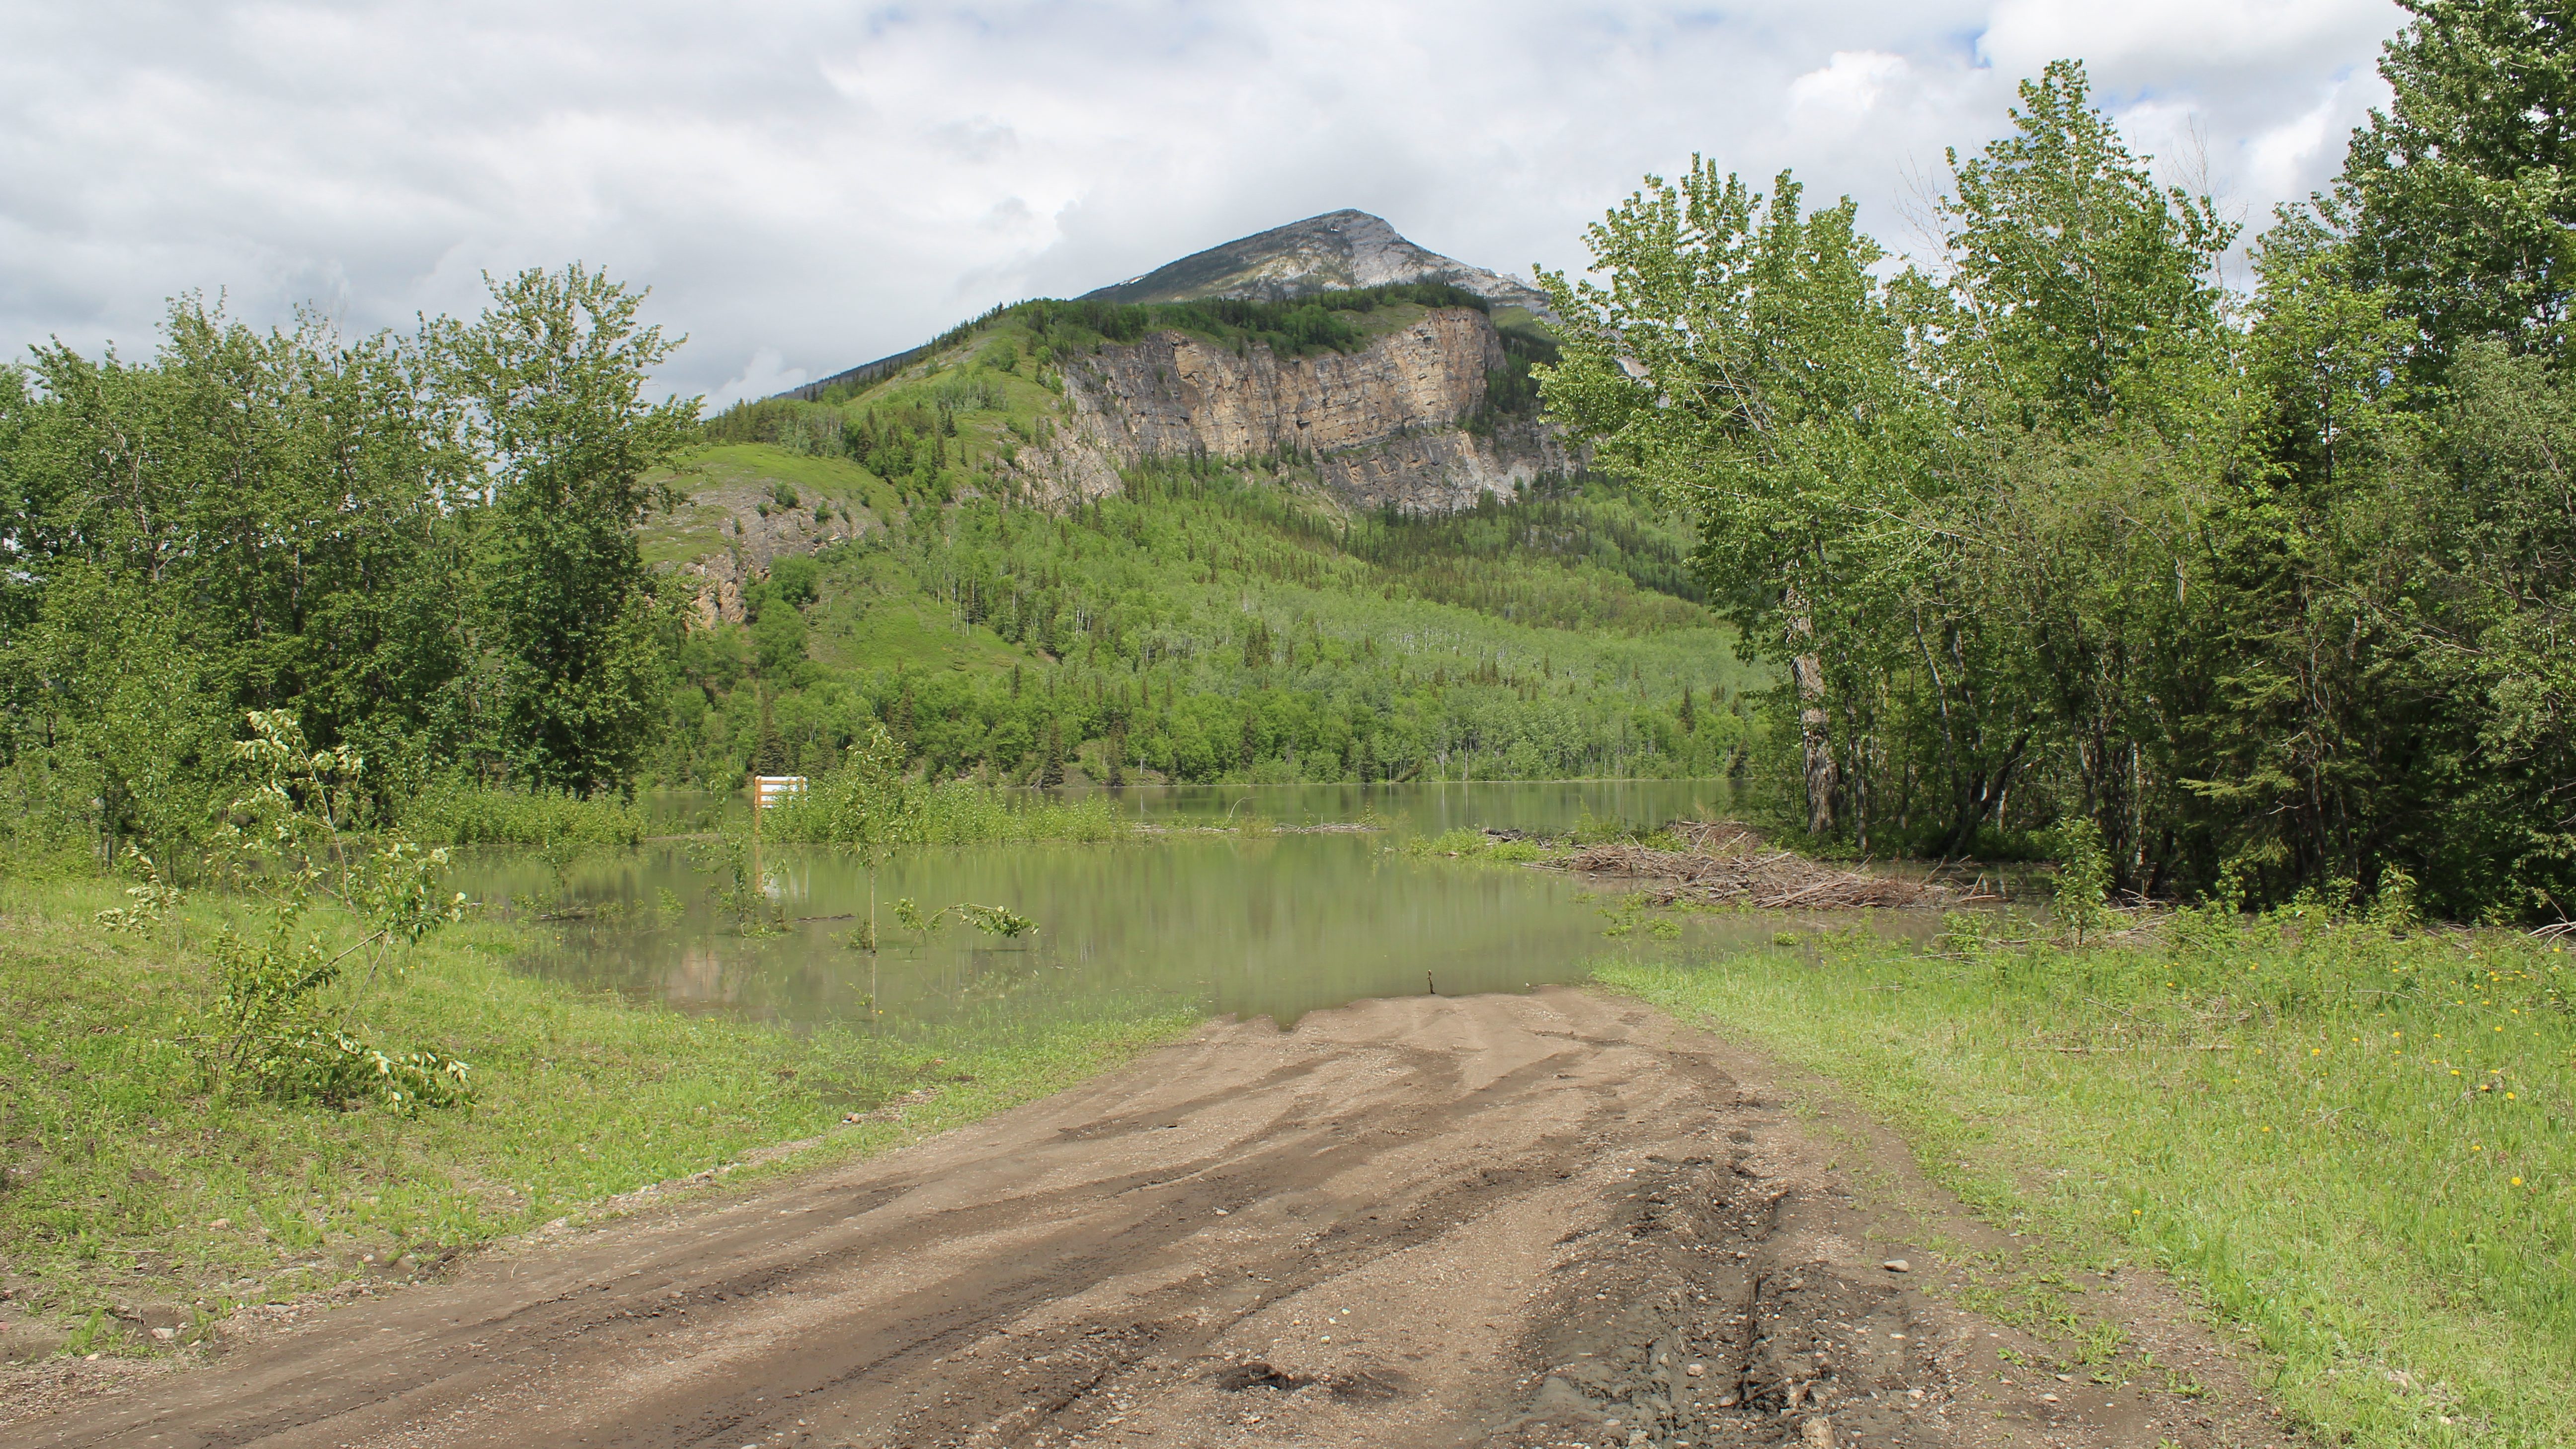 Flooding around the Nahanni Butte campground area